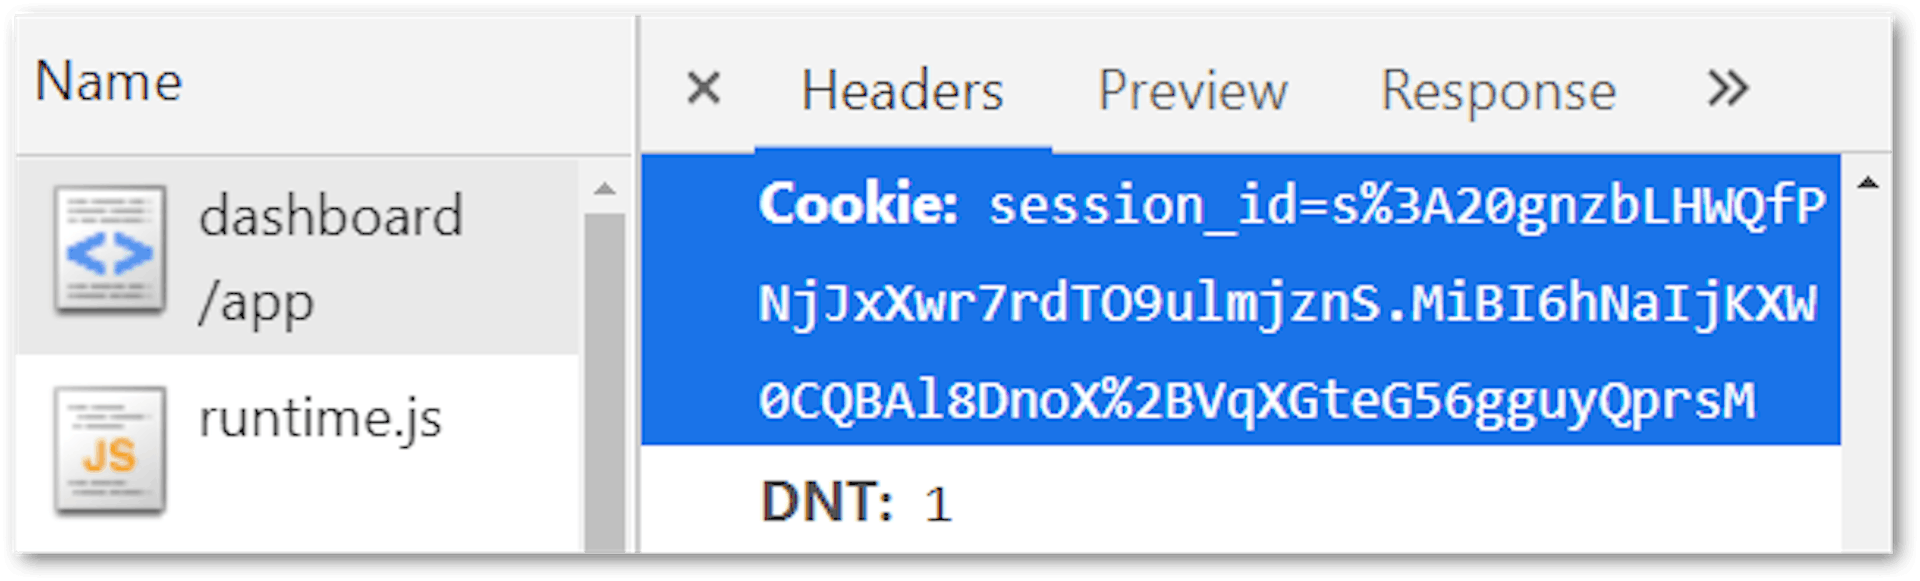 Request with session-id in cookie